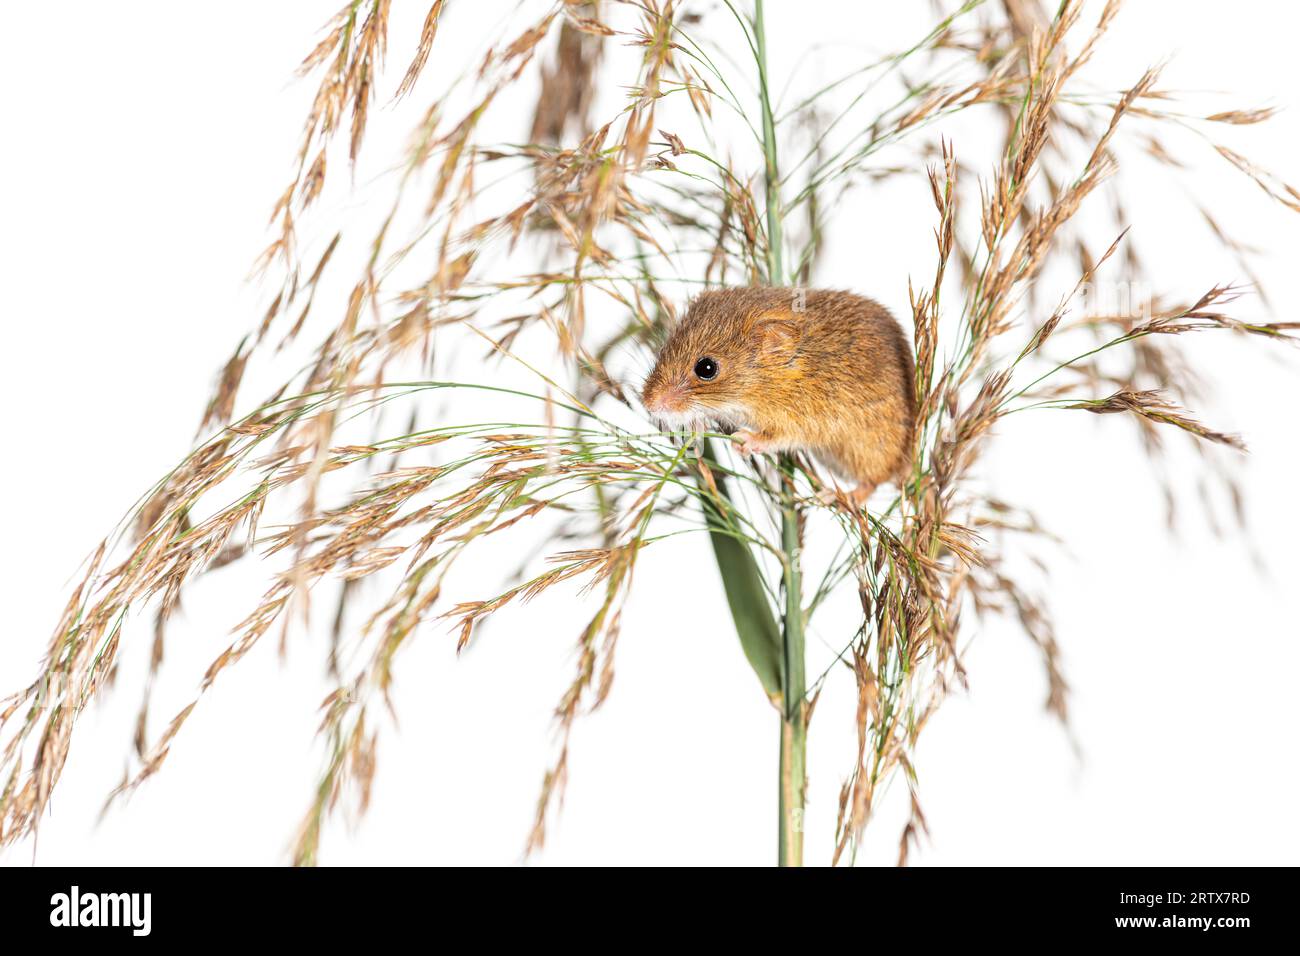 Harvest mouse, Micromys minutus, climbing, holding and balancing on high grass, isolated on white Stock Photo